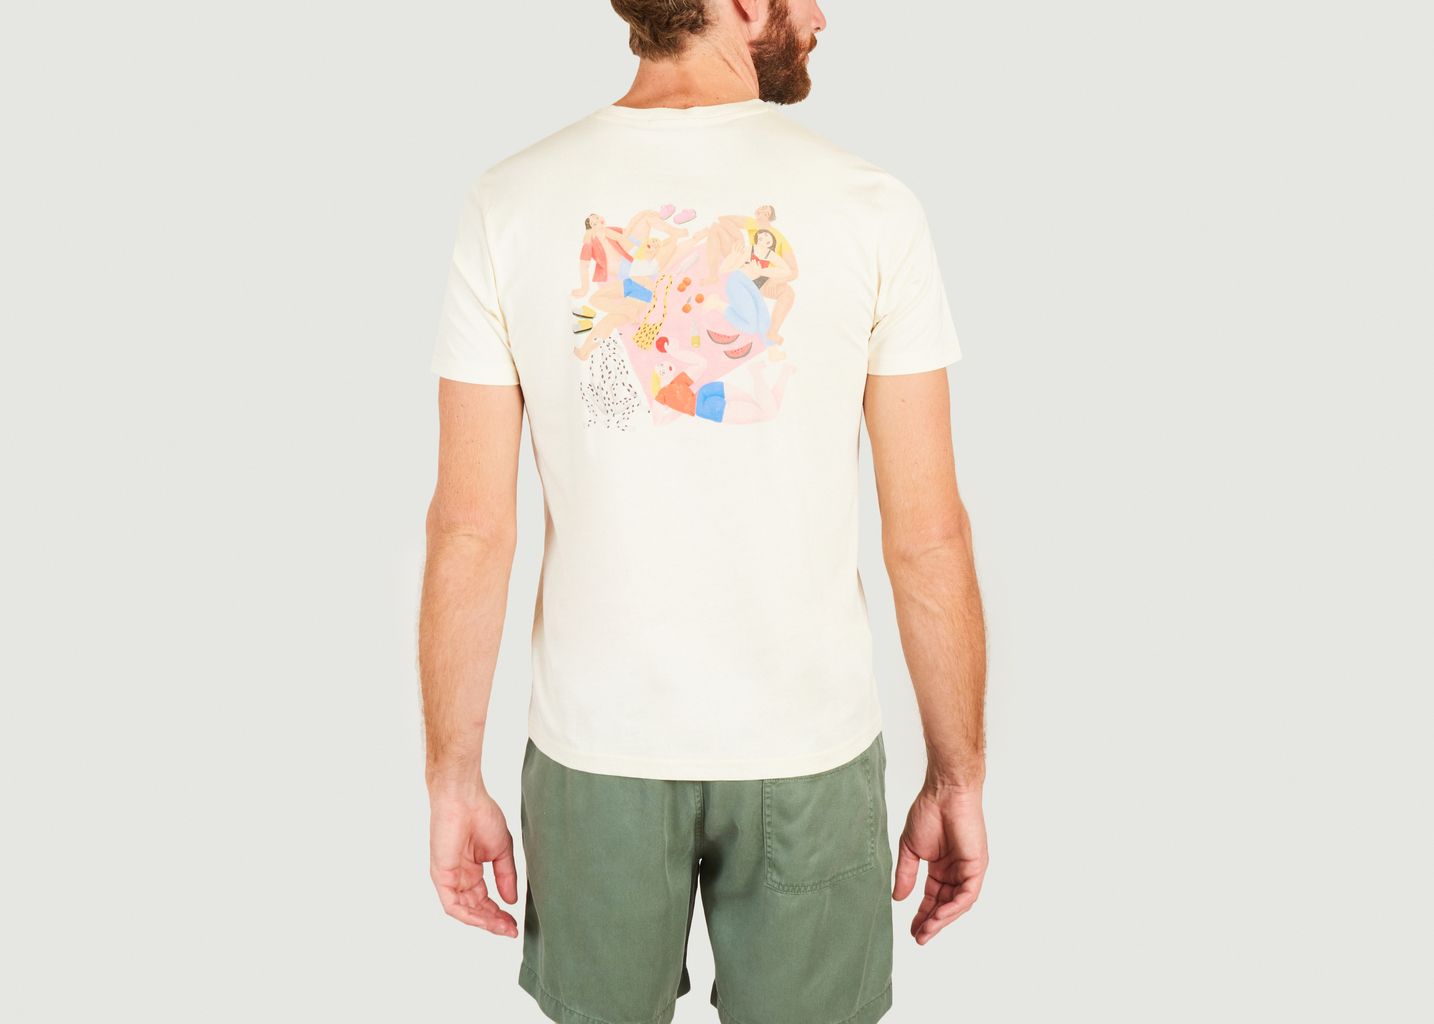 Olow x Cépé Country T-Shirt - Olow